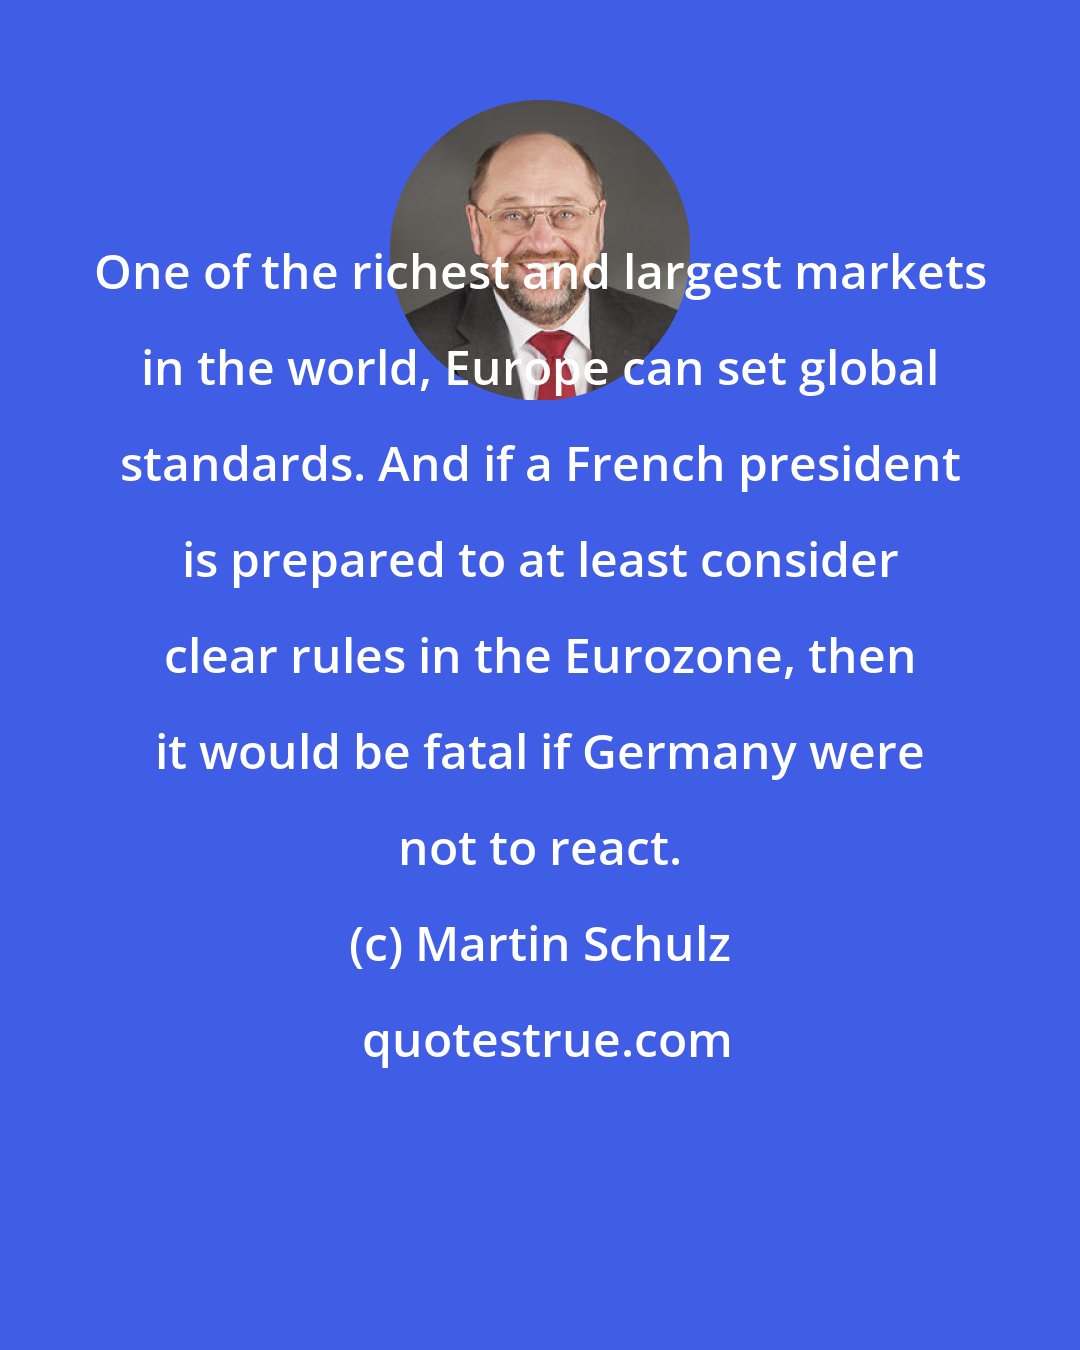 Martin Schulz: One of the richest and largest markets in the world, Europe can set global standards. And if a French president is prepared to at least consider clear rules in the Eurozone, then it would be fatal if Germany were not to react.